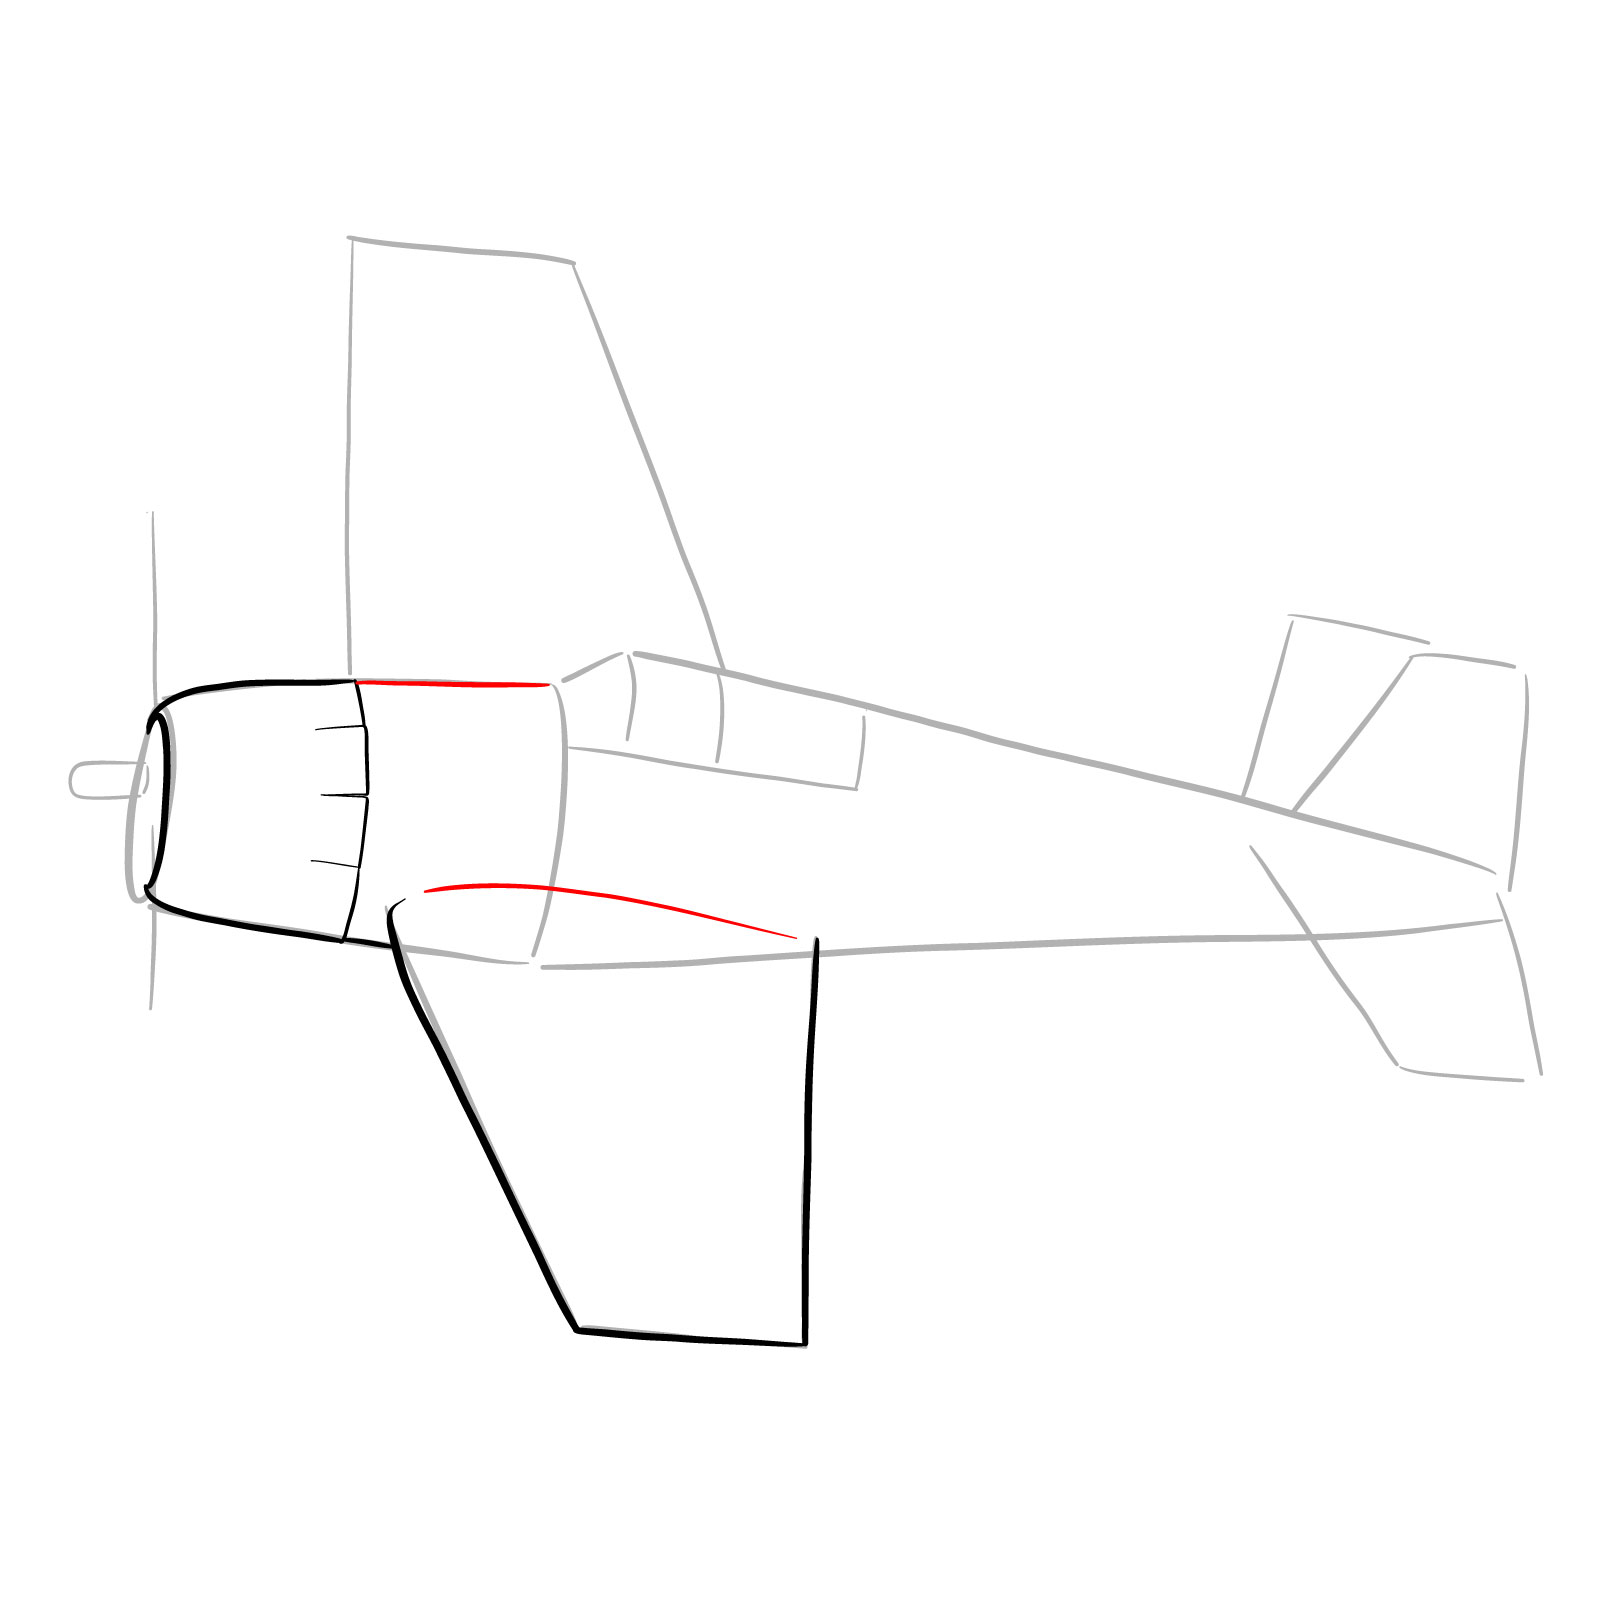 How to draw the F6F-5 Hellcat - step 09